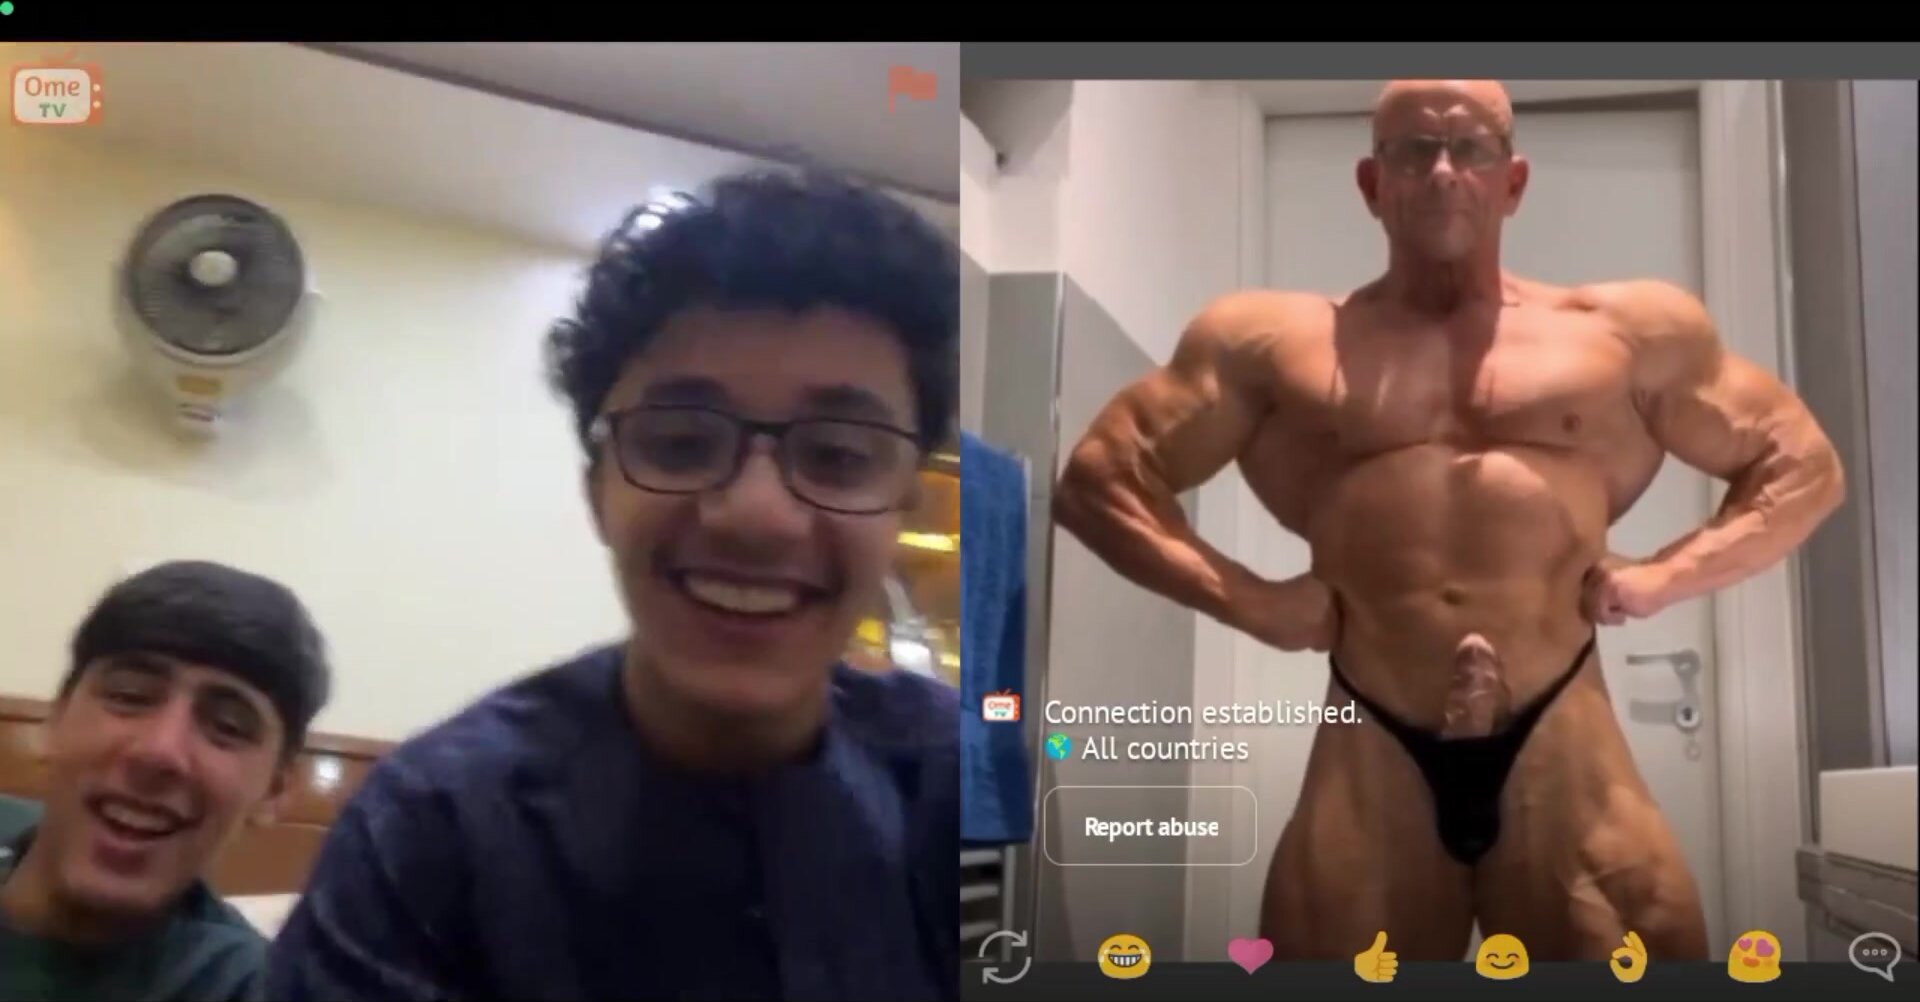 muscle webcam chat laughed at